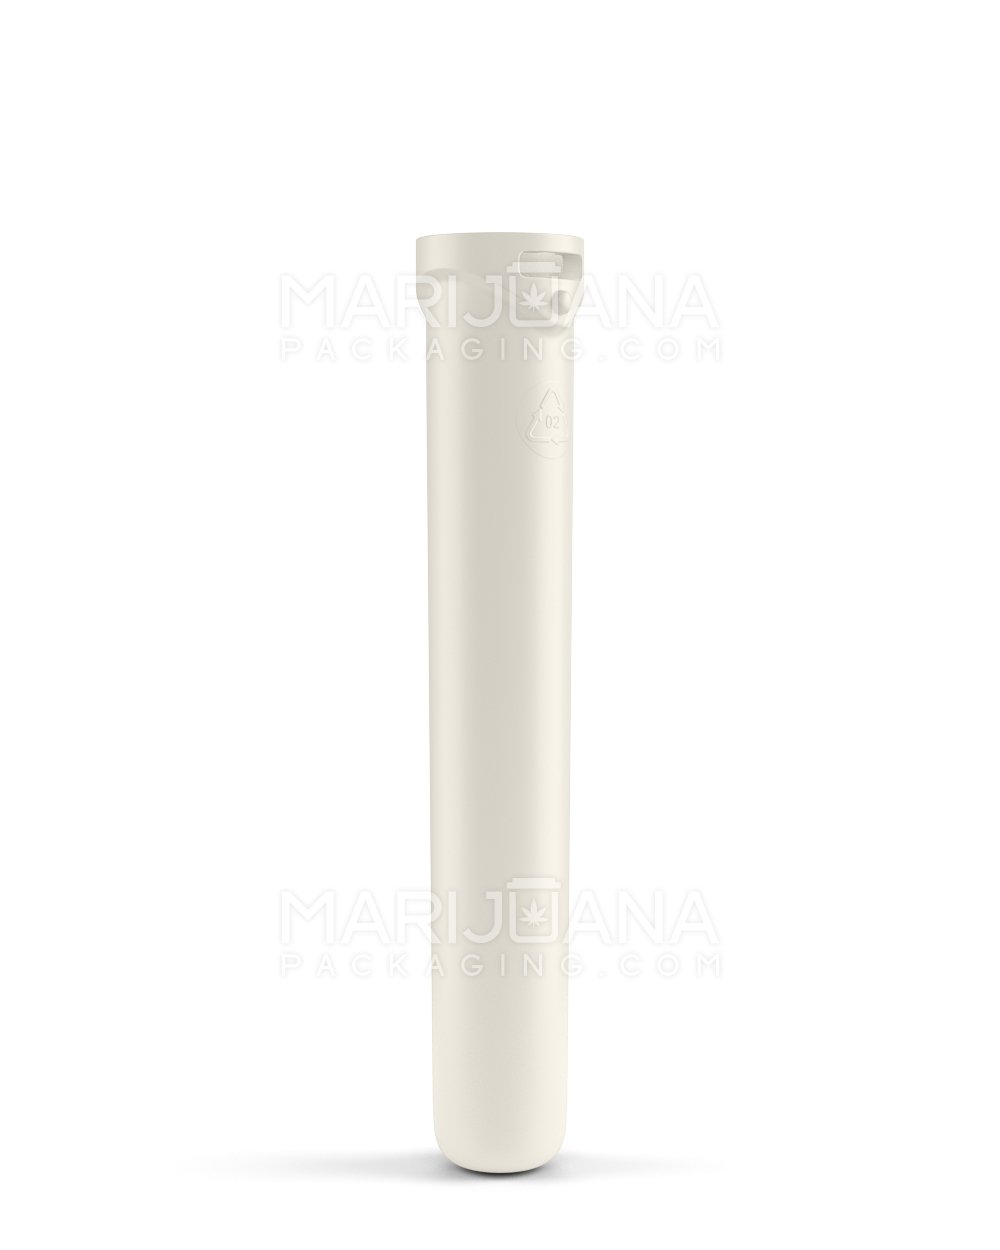 Child Resistant & Sustainable | 100% Recyclable "Line-up Arrow" Reclaimed Ocean Plastic Pre-Roll Tubes | 110mm - Beige - 3